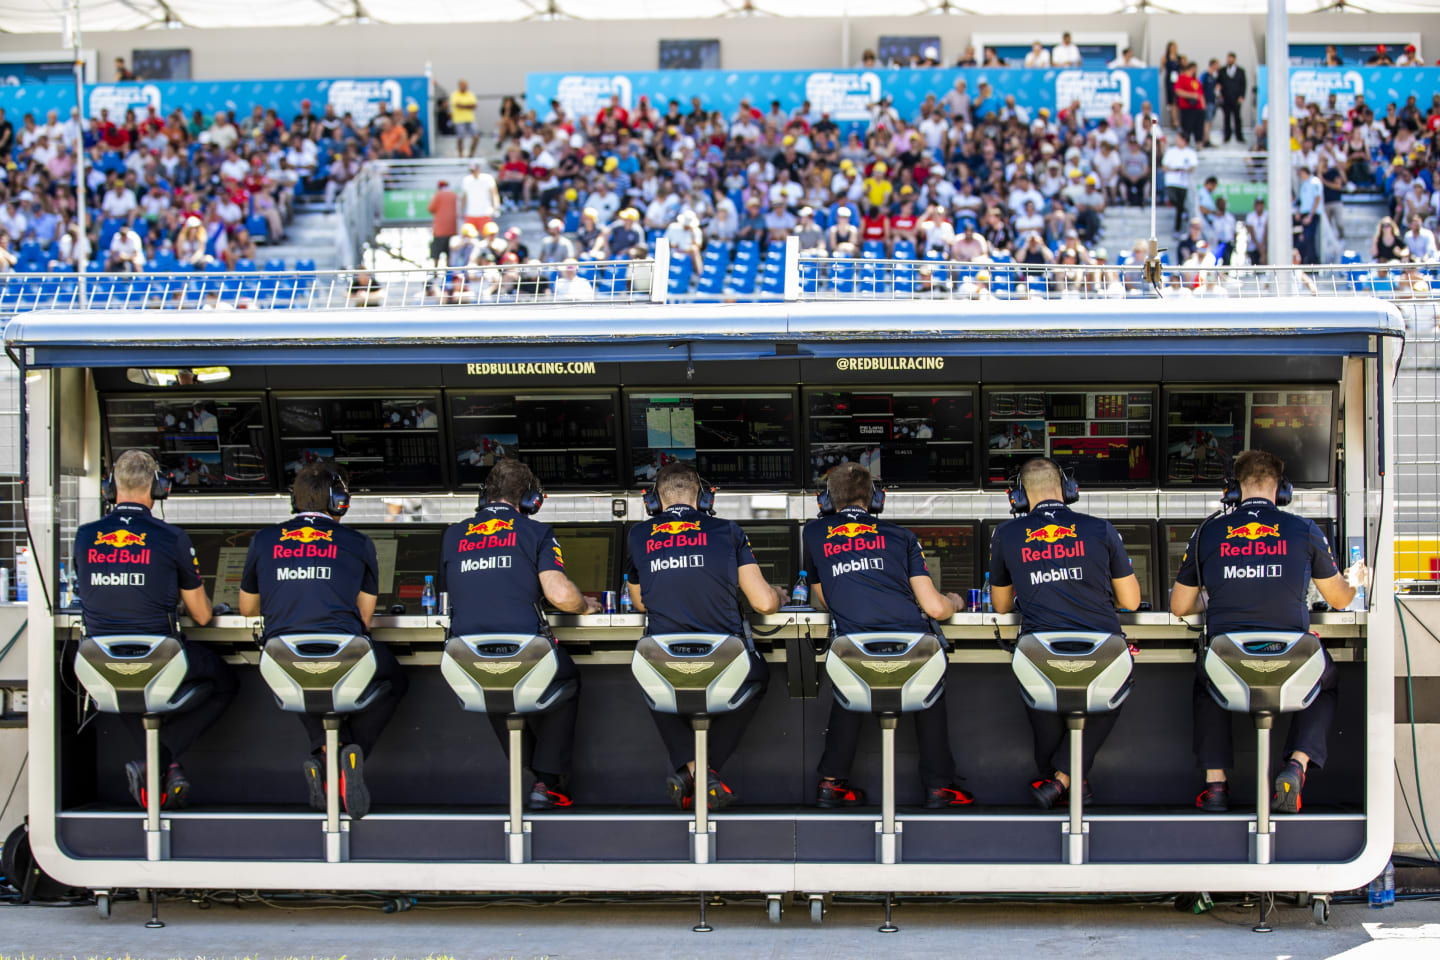 LE CASTELLET, FRANCE - JUNE 22: The Red Bull Racing pit wall during qualifying for the F1 Grand